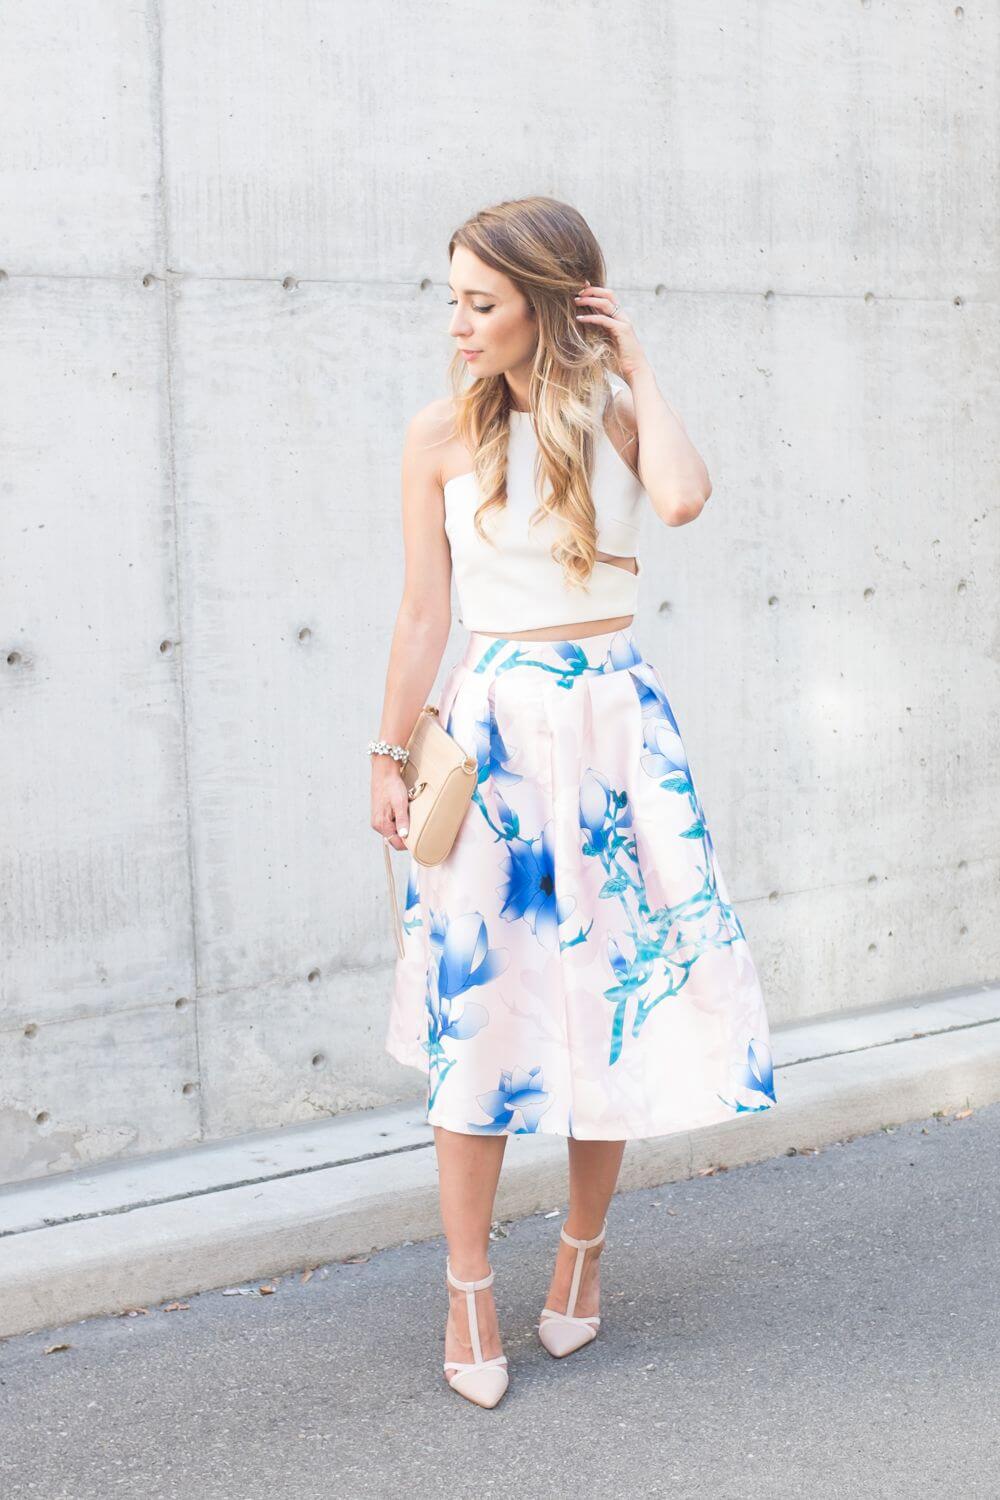 15 Perfect Looks for Easter Sunday